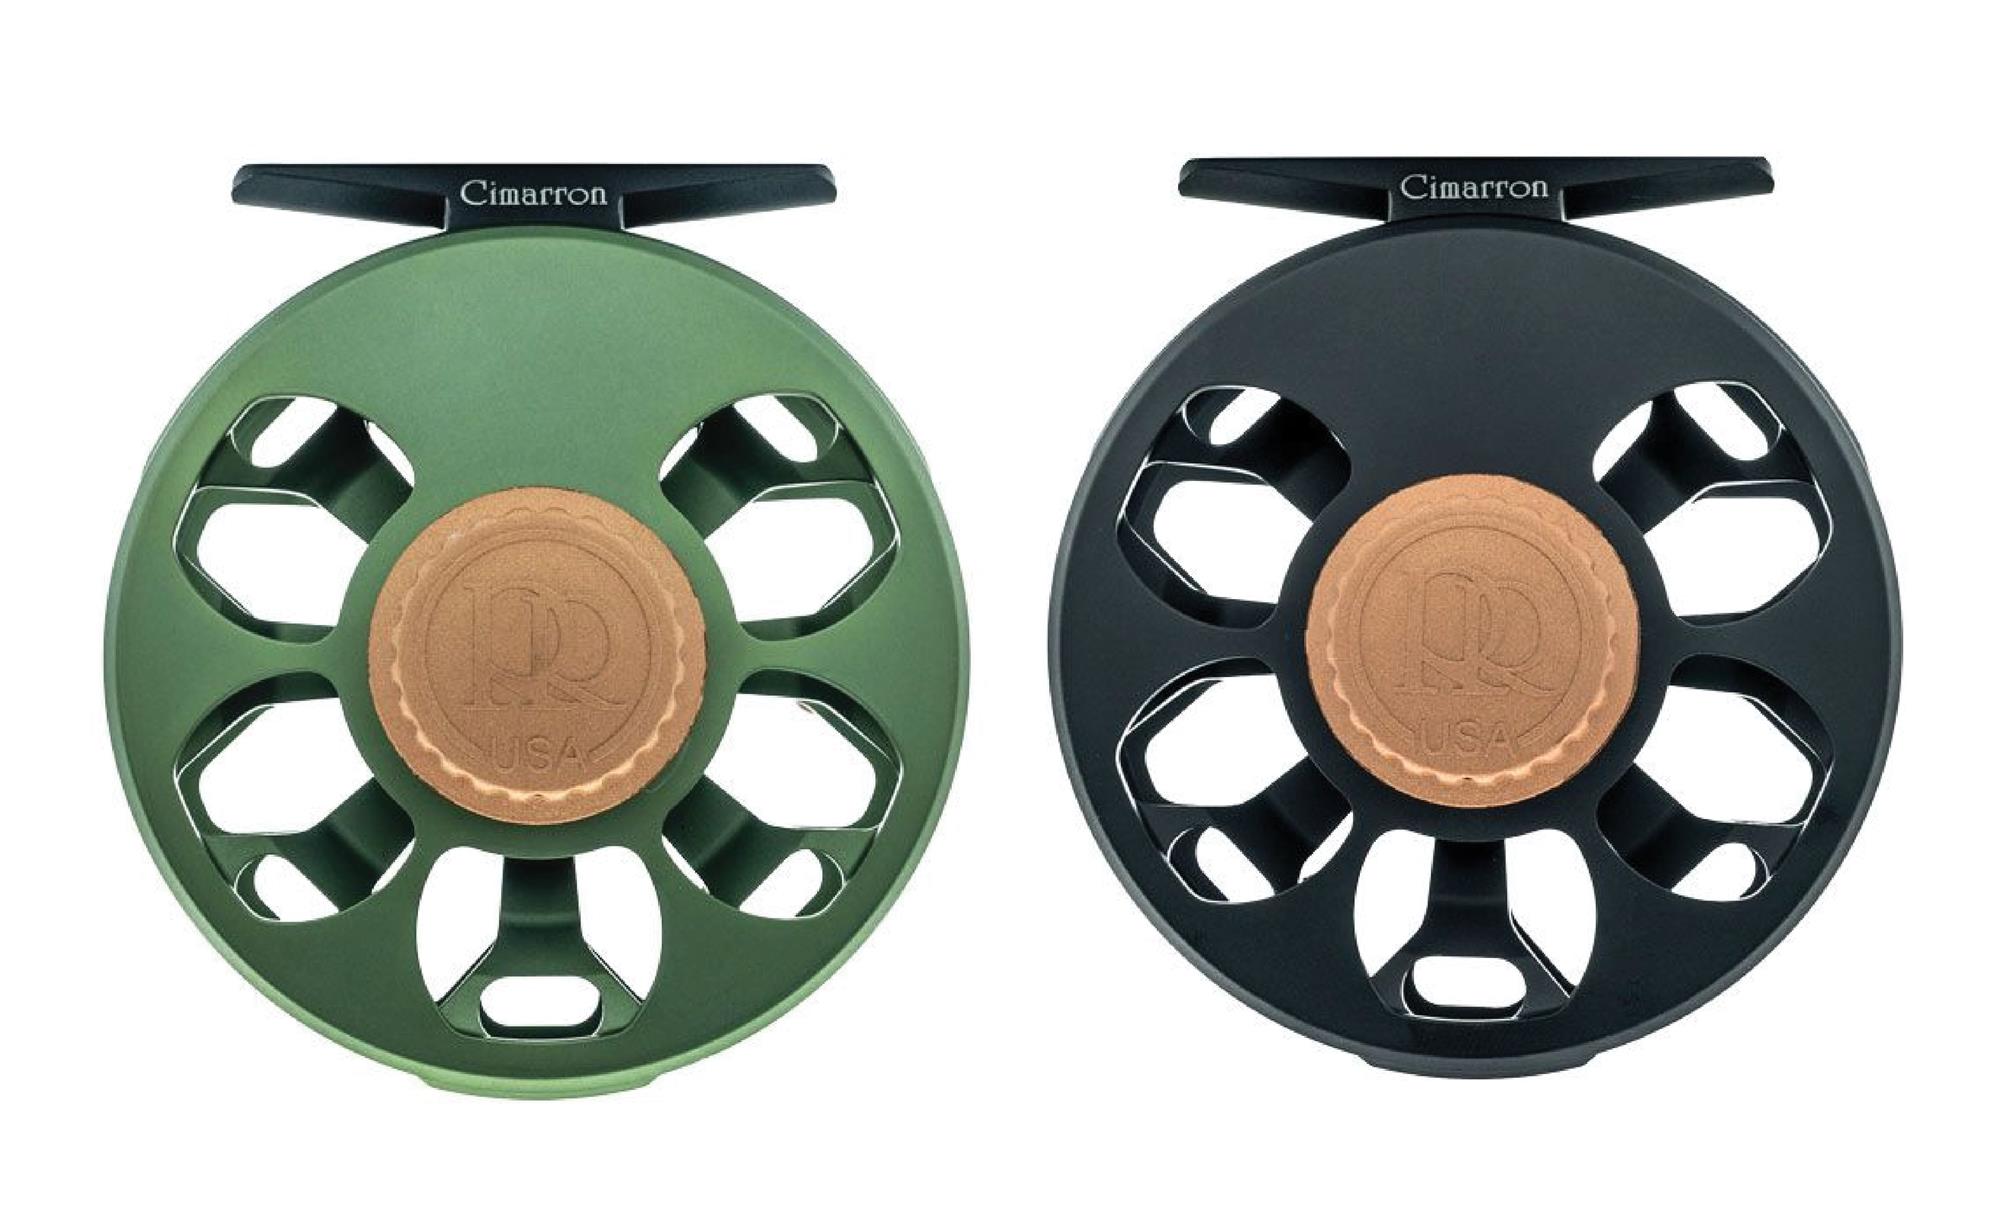 Ross Reels Cimarron Fly Reel is a best price made in USA fly reel for sale online.